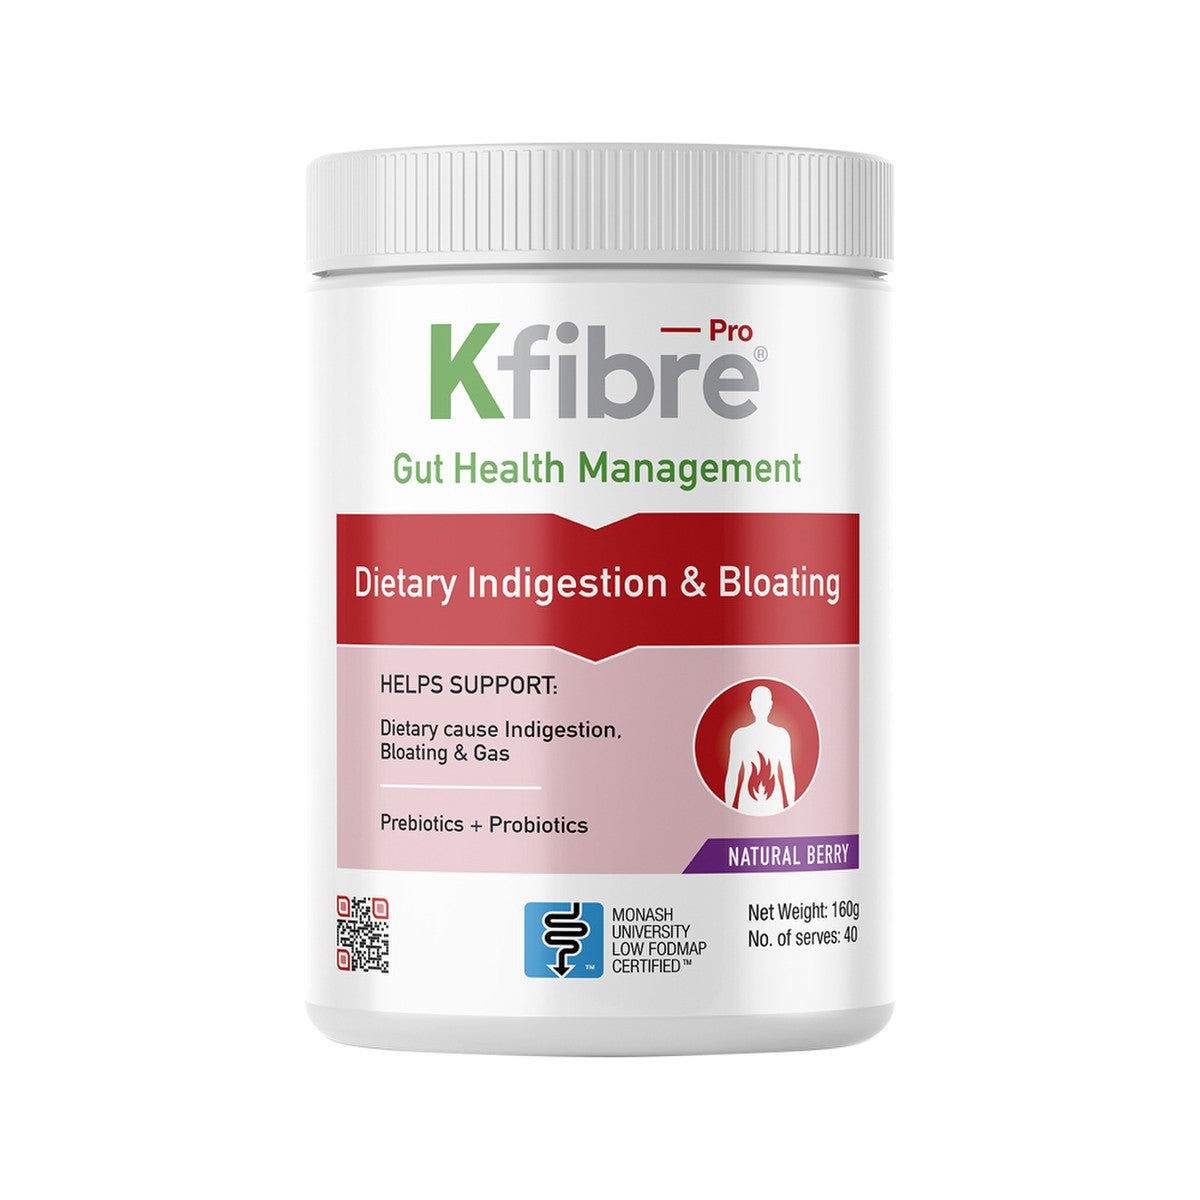 KFIBRE Pro Dietary Indigestion & Bloating Natural Berry Tub 160g - Dr Earth - Supplements